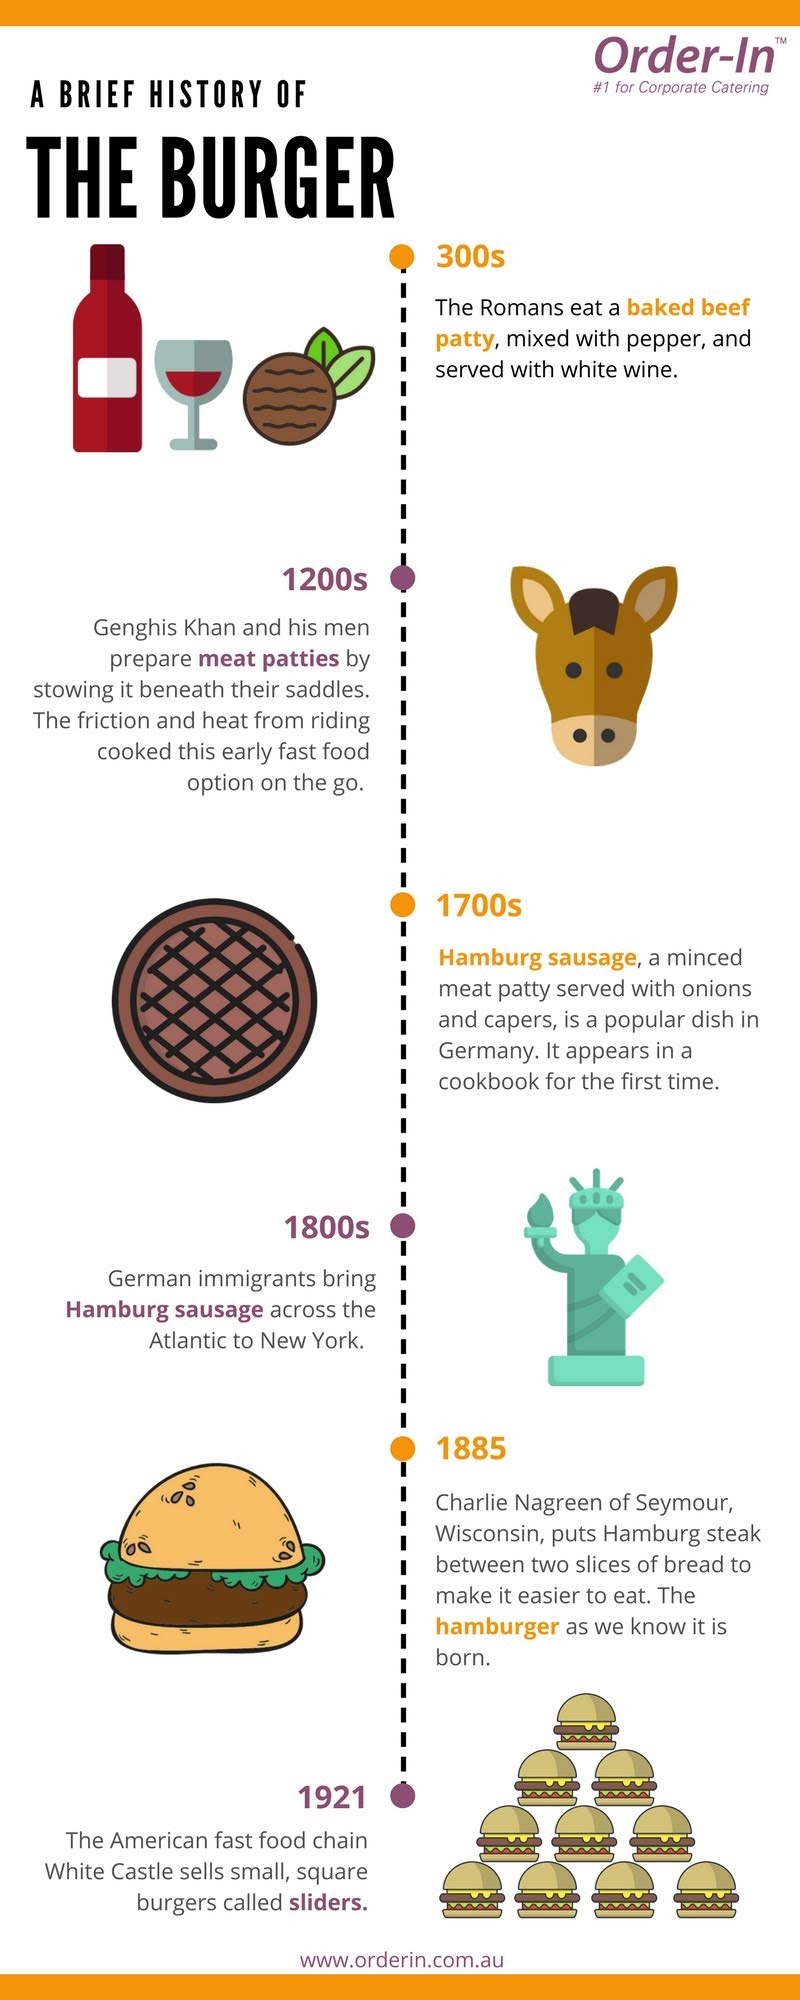 The Brief History of the Burger